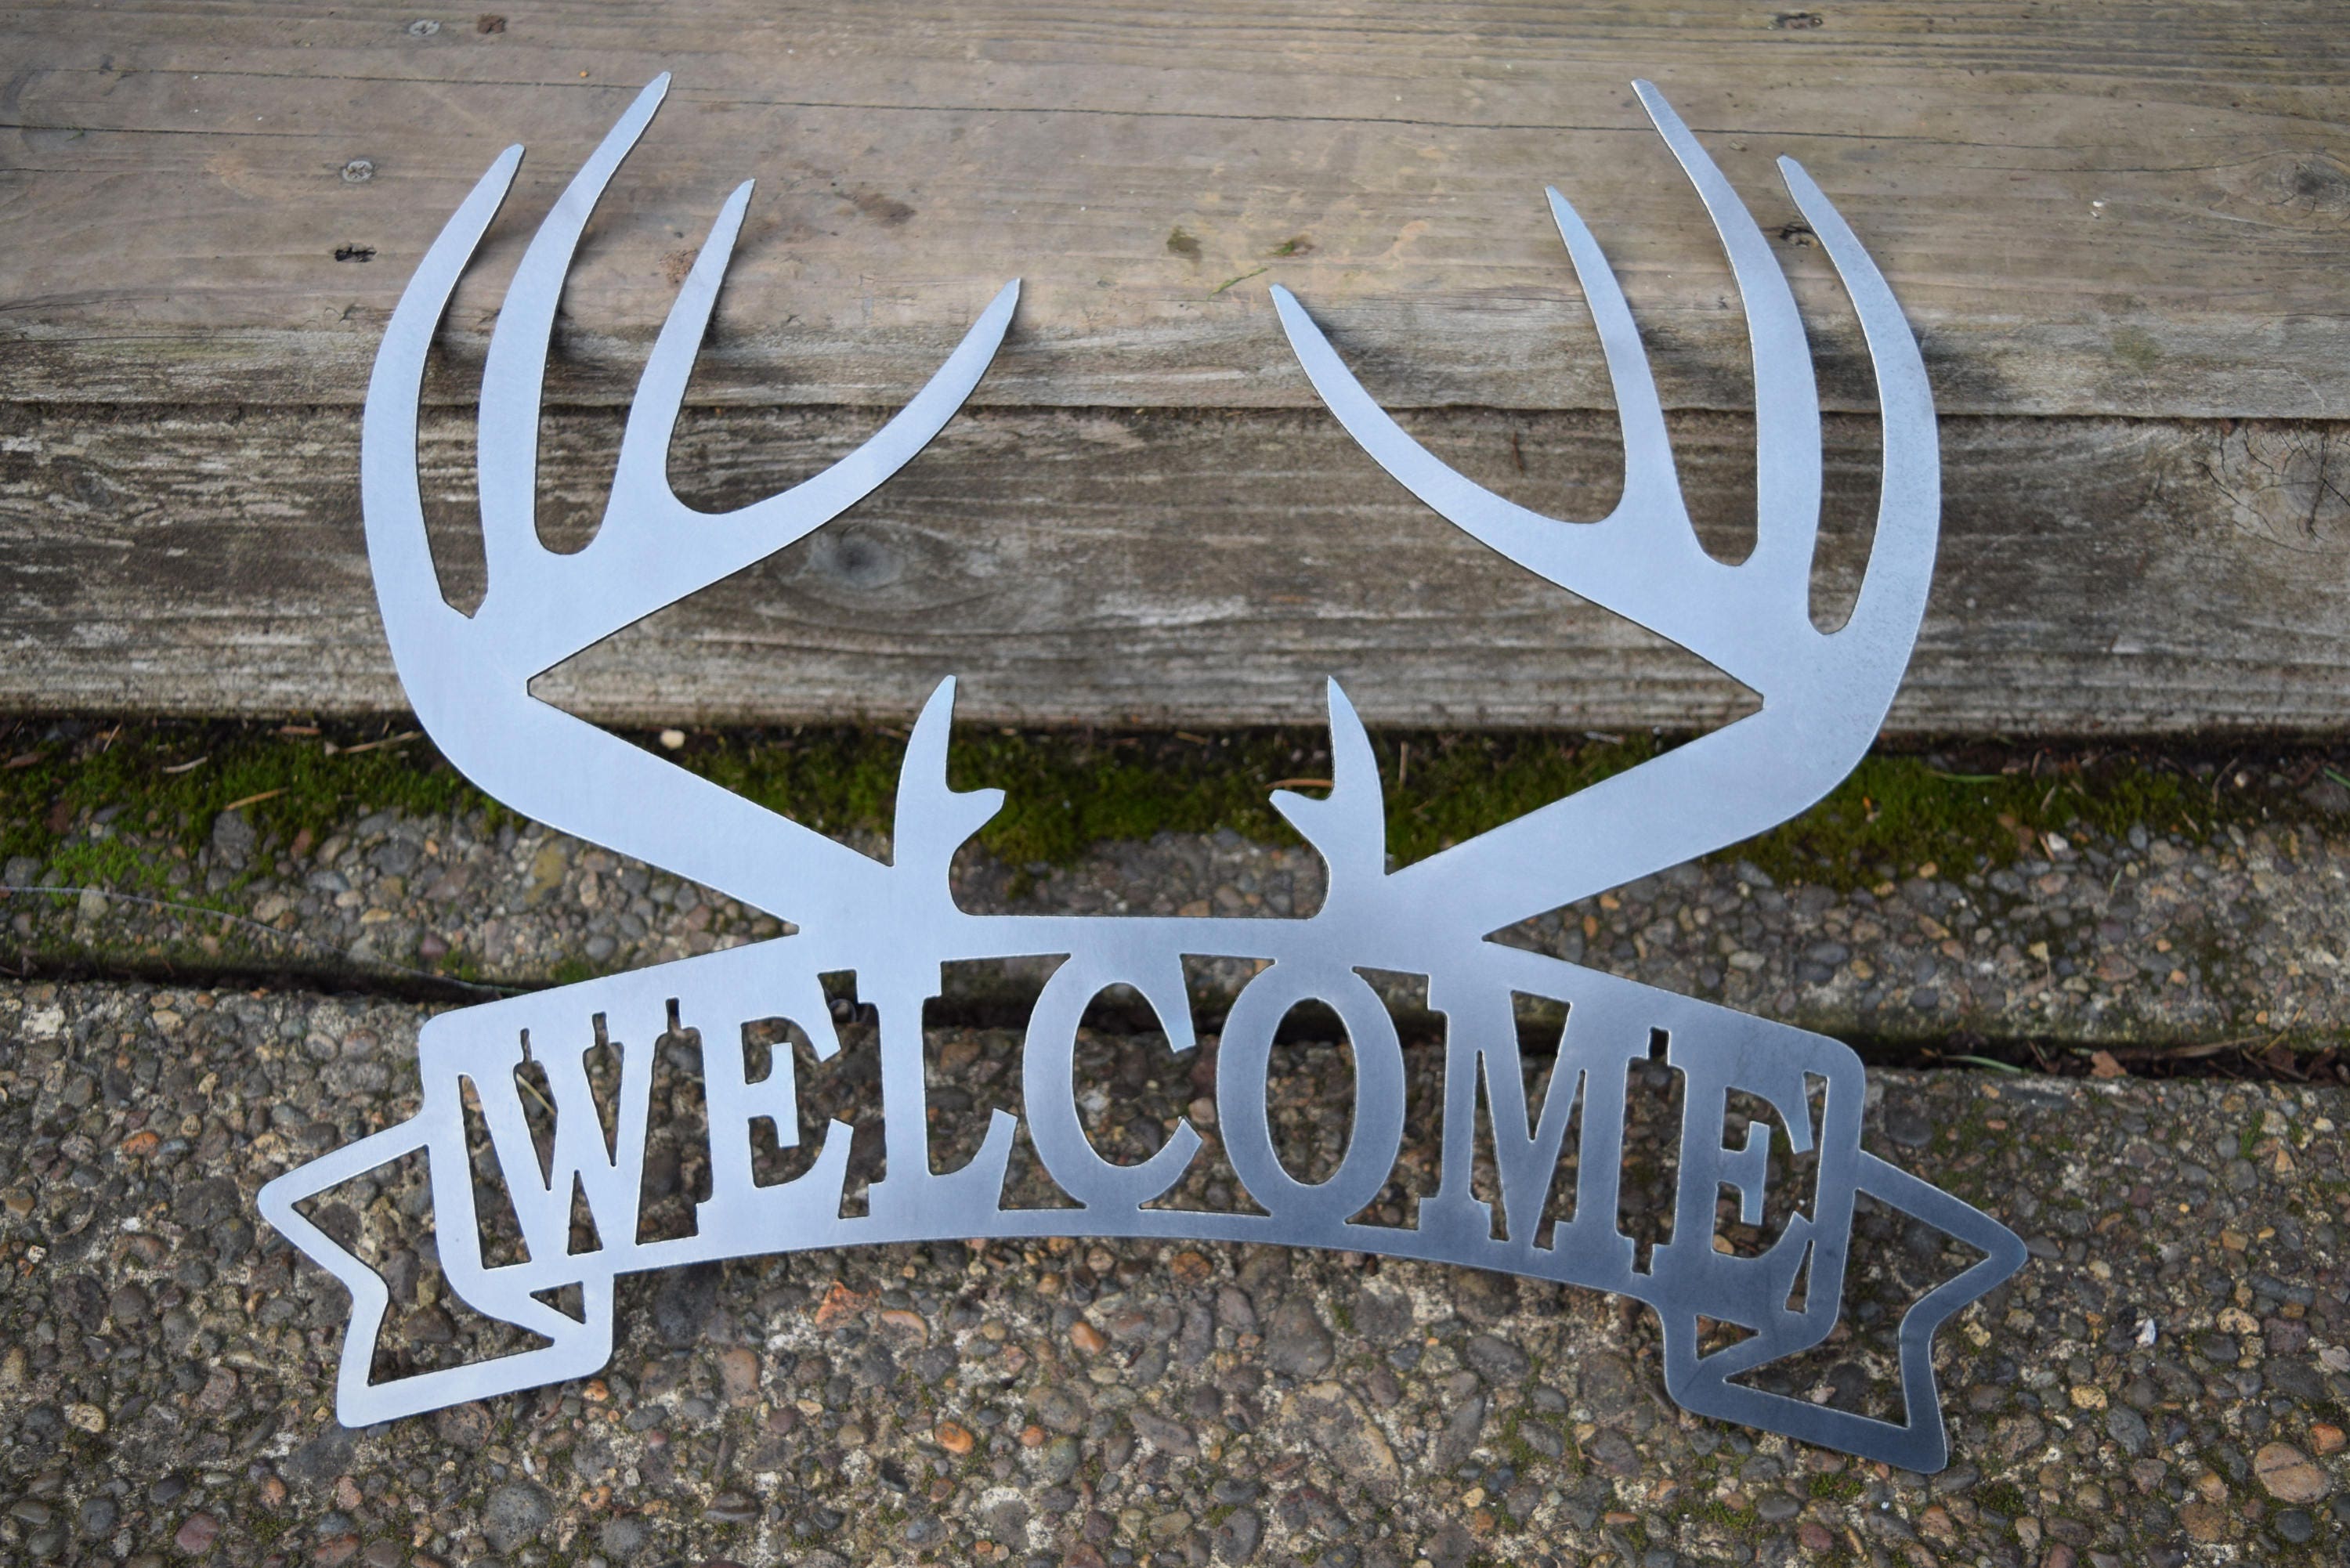 Antler Welcome Sign